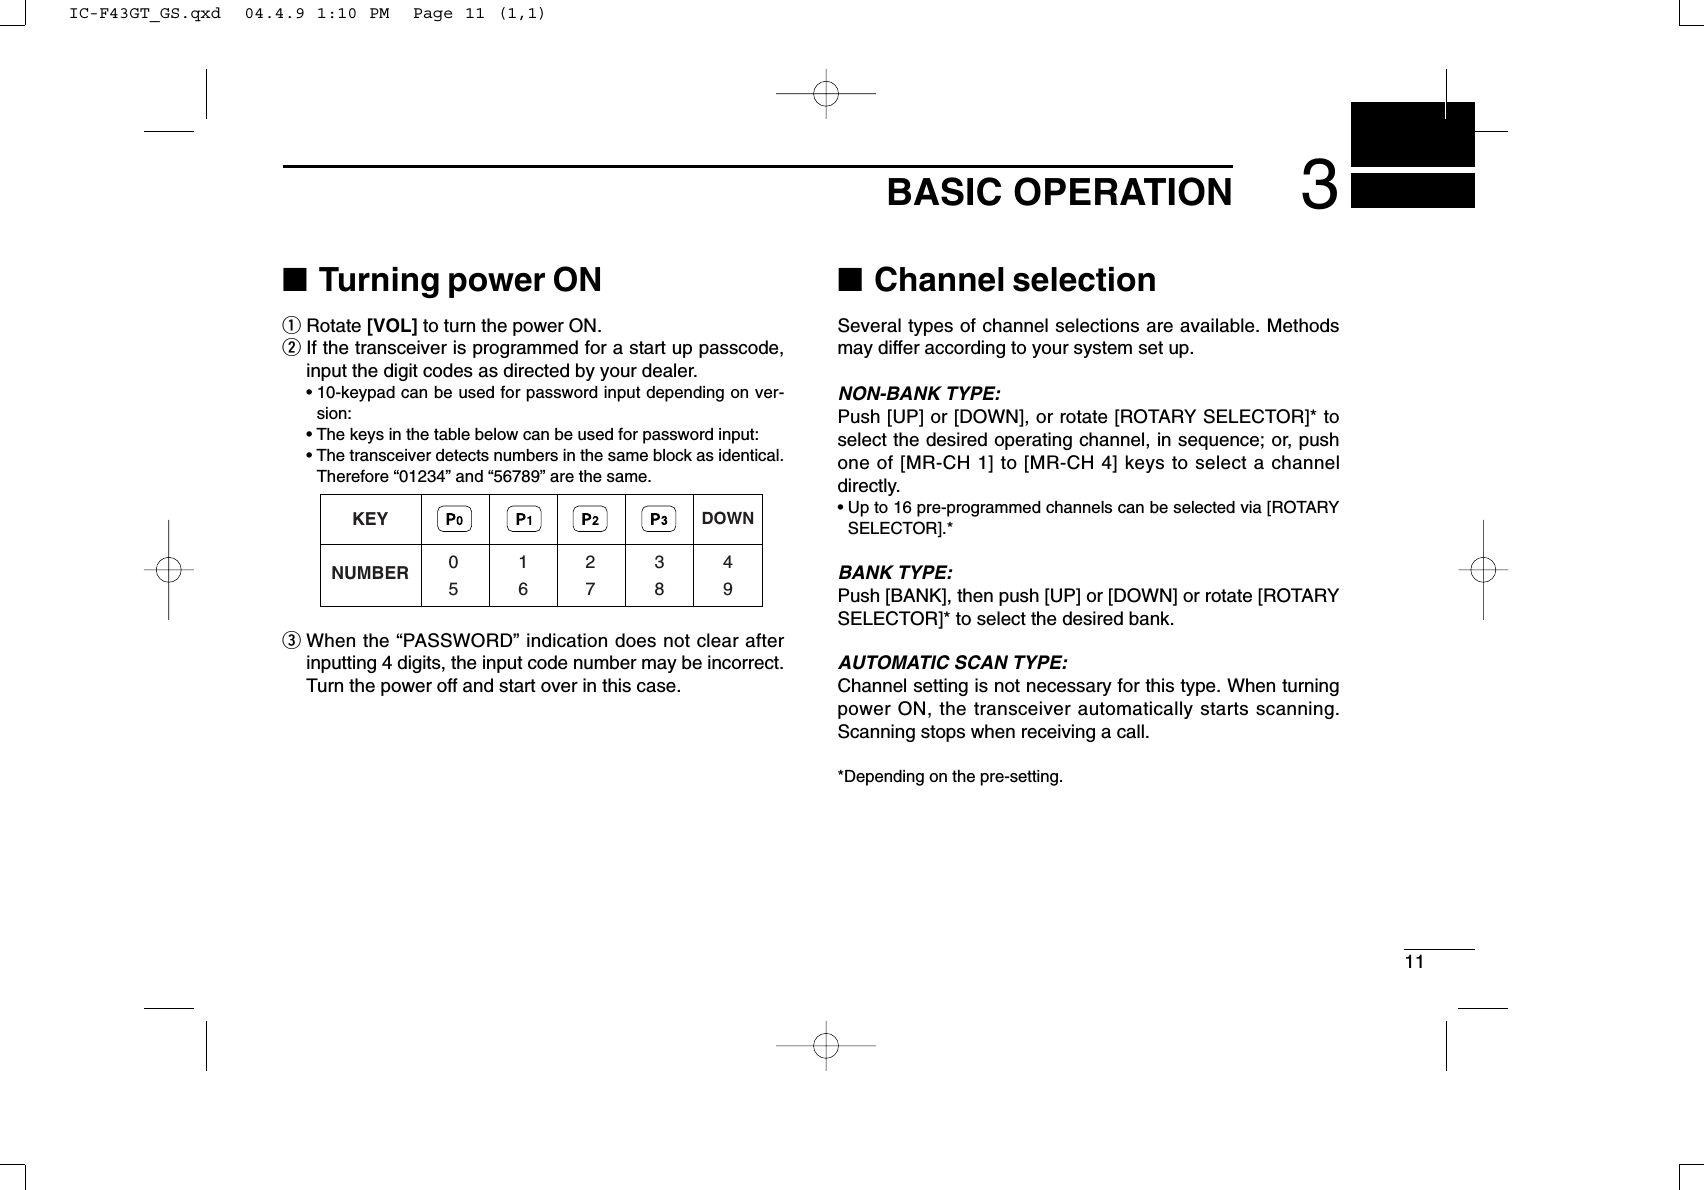 113BASIC OPERATION■Turning power ONqRotate [VOL] to turn the power ON.wIf the transceiver is programmed for a start up passcode,input the digit codes as directed by your dealer.• 10-keypad can be used for password input depending on ver-sion:• The keys in the table below can be used for password input:• The transceiver detects numbers in the same block as identical.Therefore “01234” and “56789” are the same.eWhen the “PASSWORD” indication does not clear afterinputting 4 digits, the input code number may be incorrect.Turn the power off and start over in this case.■Channel selectionSeveral types of channel selections are available. Methodsmay differ according to your system set up.NON-BANK TYPE:Push [UP] or [DOWN], or rotate [ROTARY SELECTOR]* toselect the desired operating channel, in sequence; or, pushone of [MR-CH 1] to [MR-CH 4] keys to select a channeldirectly.• Up to 16 pre-programmed channels can be selected via [ROTARYSELECTOR].*BANK TYPE:Push [BANK], then push [UP] or [DOWN] or rotate [ROTARYSELECTOR]* to select the desired bank.AUTOMATIC SCAN TYPE:Channel setting is not necessary for this type. When turningpower ON, the transceiver automatically starts scanning.Scanning stops when receiving a call.*Depending on the pre-setting.KEYNUMBER 0549382716DOWNIC-F43GT_GS.qxd  04.4.9 1:10 PM  Page 11 (1,1)